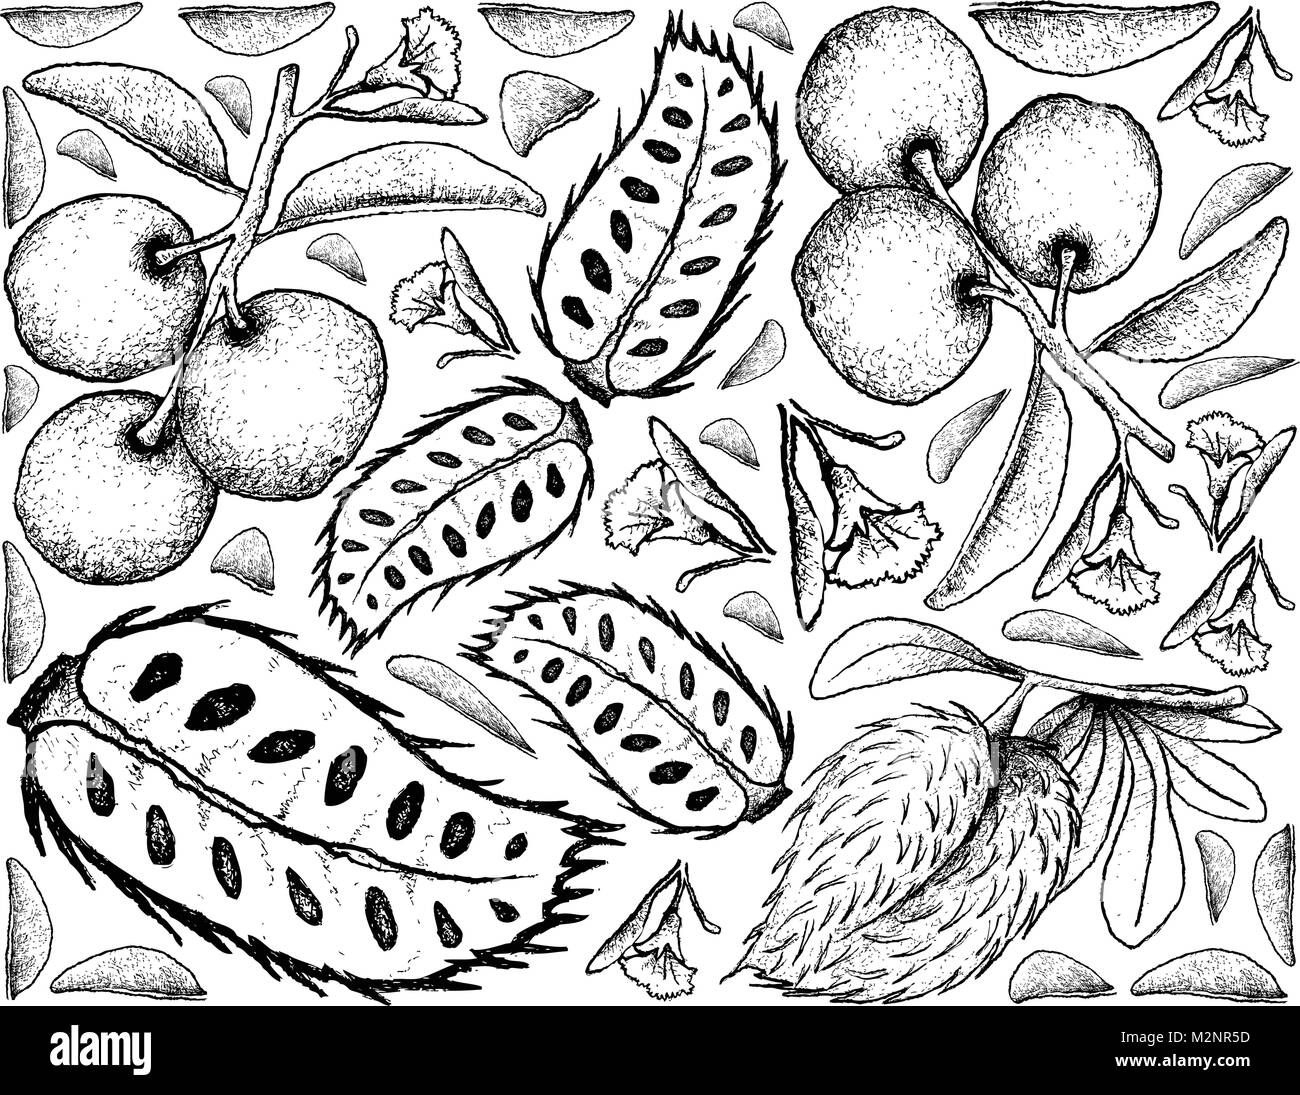 Fresh Fruits, Illustration Background of Hand Drawn Sketch Fresh Tallow Plum or Ximenia Americana and Soursop or Annona Muricata Fruits. Stock Vector